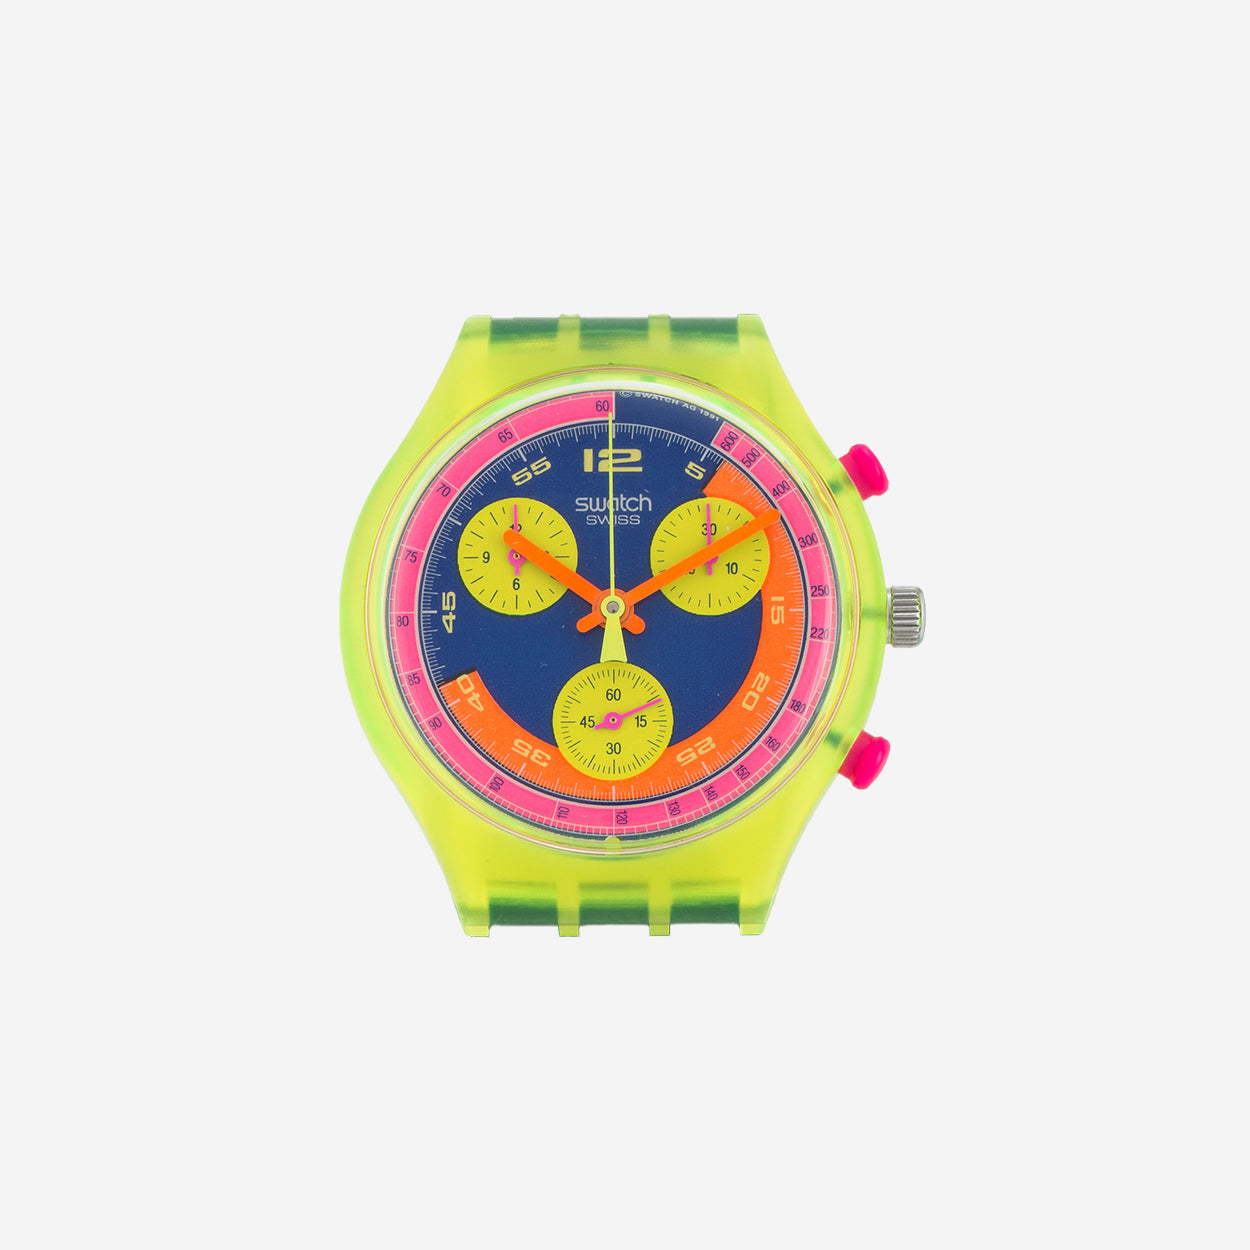 Swatch chronograph grand prix with bright case and dial highlights for A Collected Man London